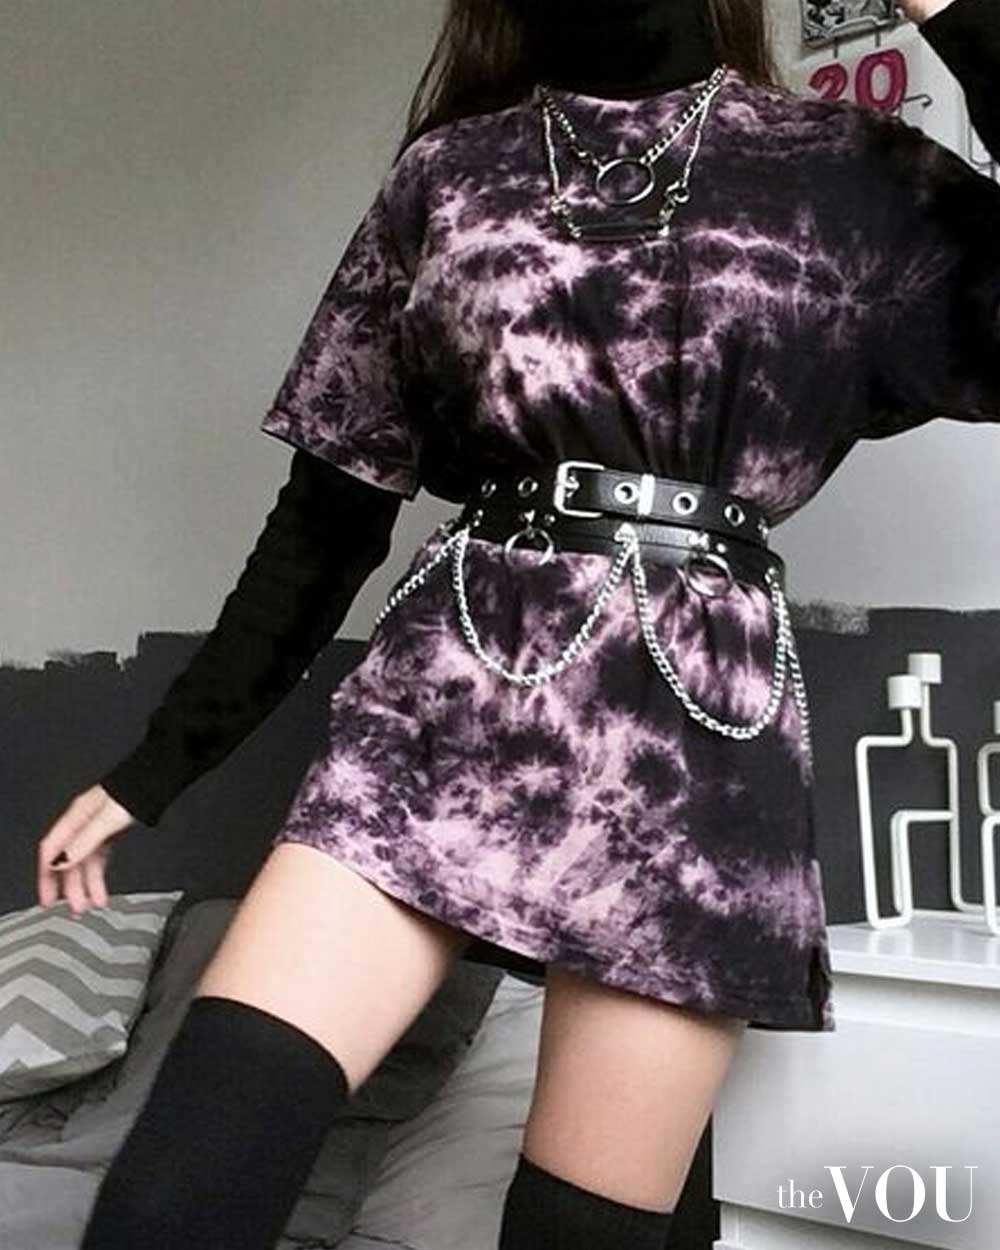 batik t-shirt, long-sleeve top, knee-high socks, belt with chain details, chain necklace